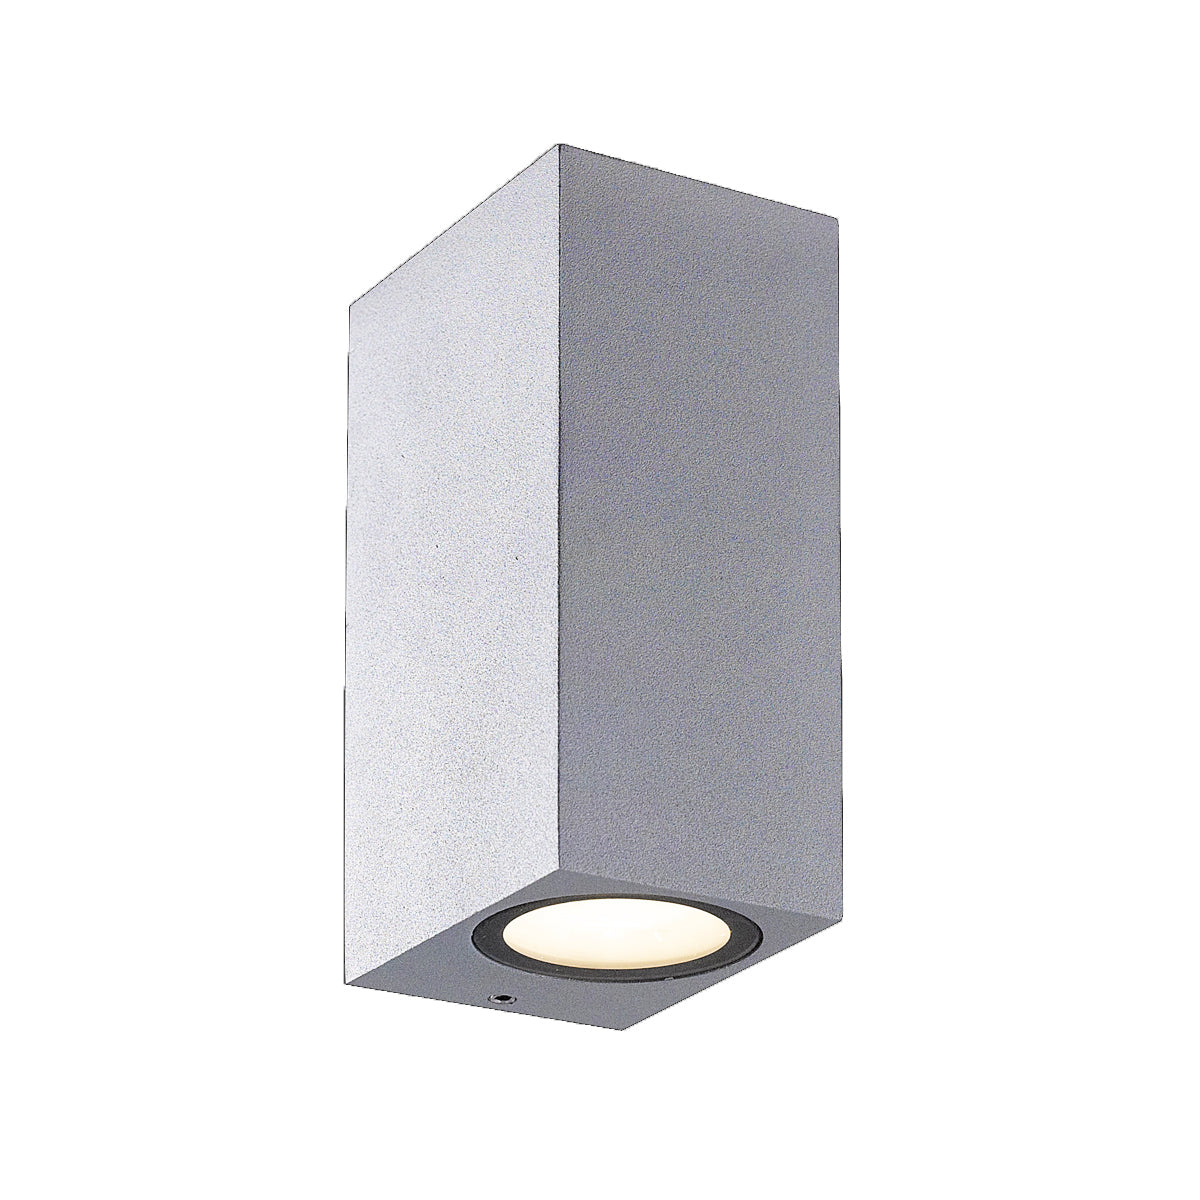 DALE Outdoor sconce Aluminum - 28290-018 INTEGRATED LED | EUROFASE